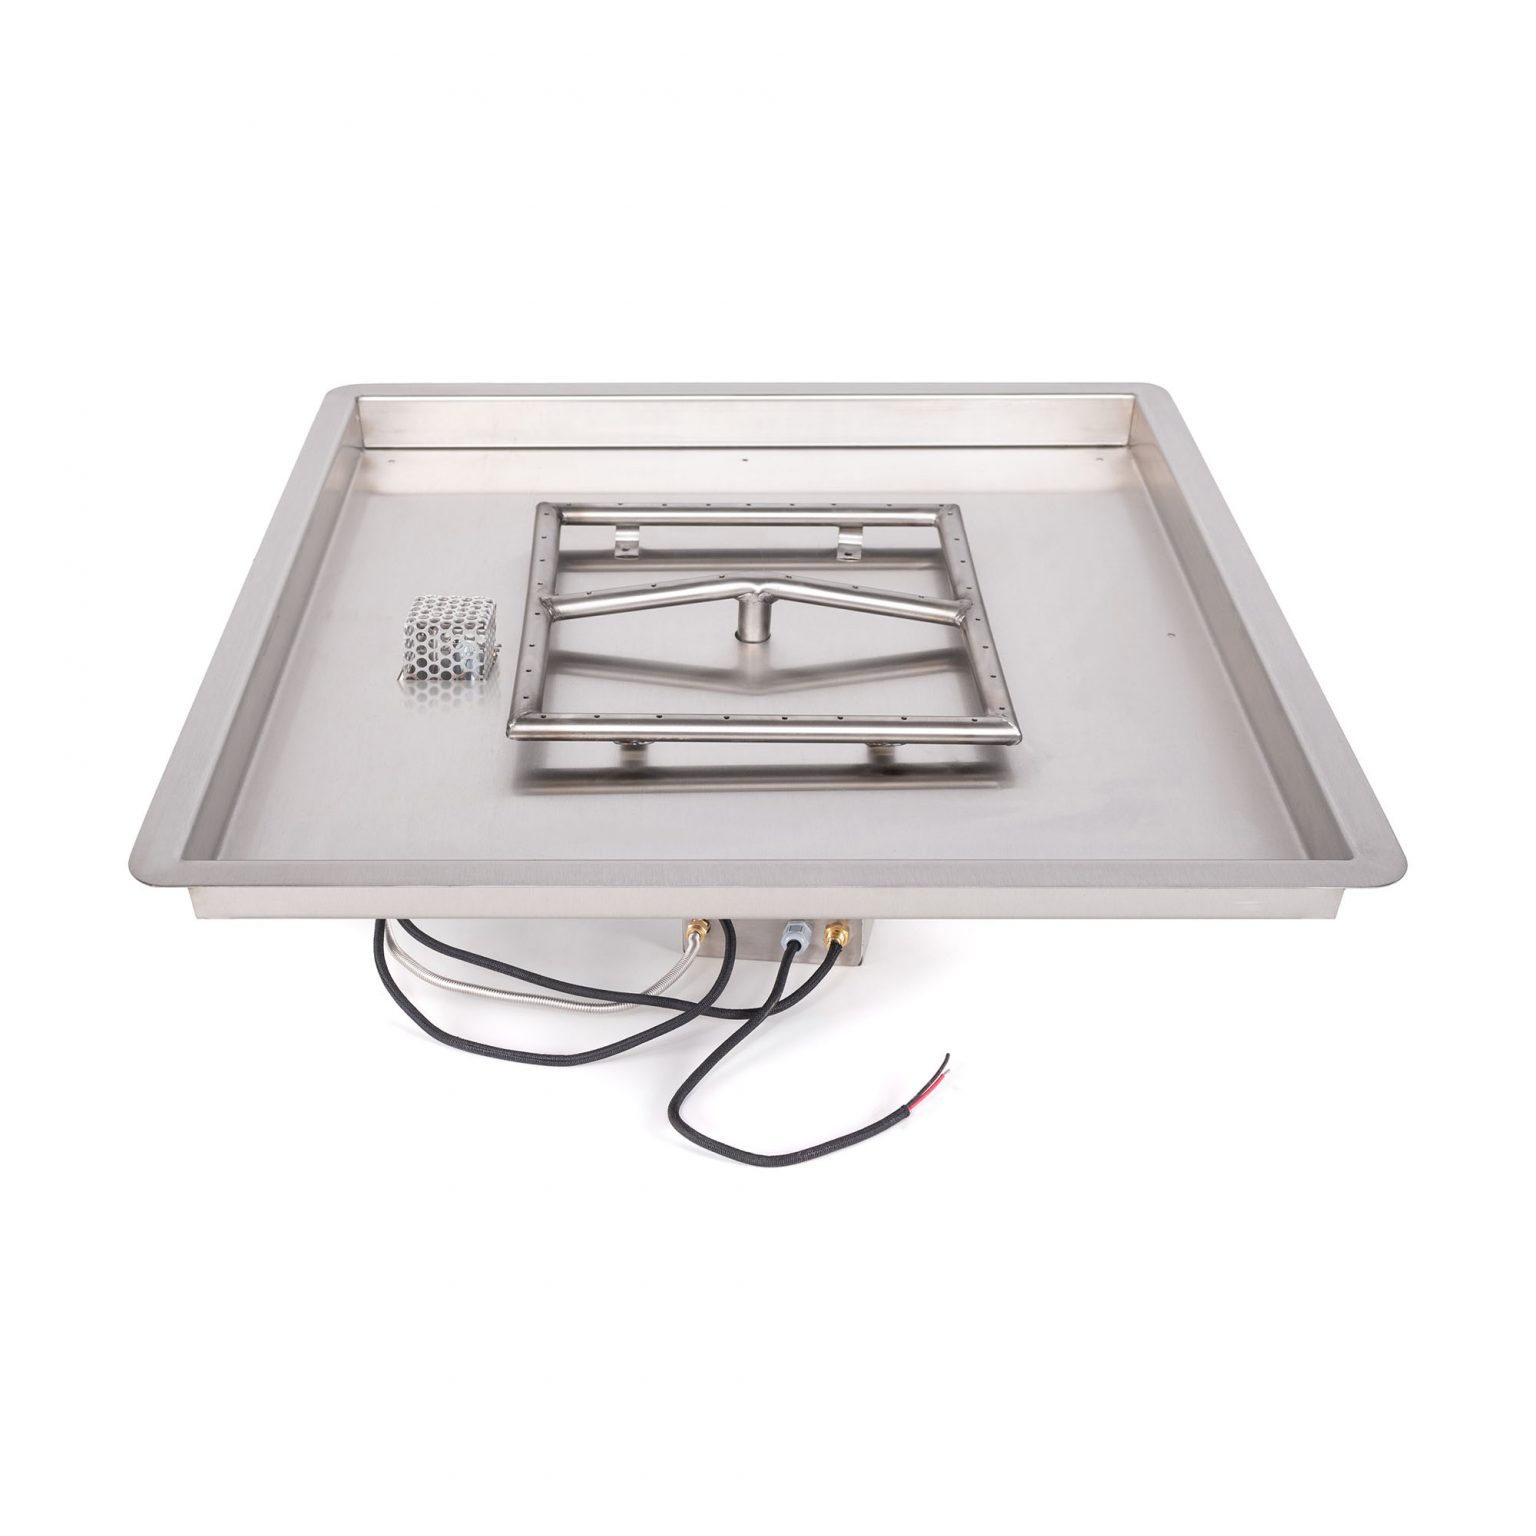 TOP Fires Square Drop-In Pan & Square Burner in Stainless Steel with Electronic Ignition Kit by The Outdoor Plus - Majestic Fountains